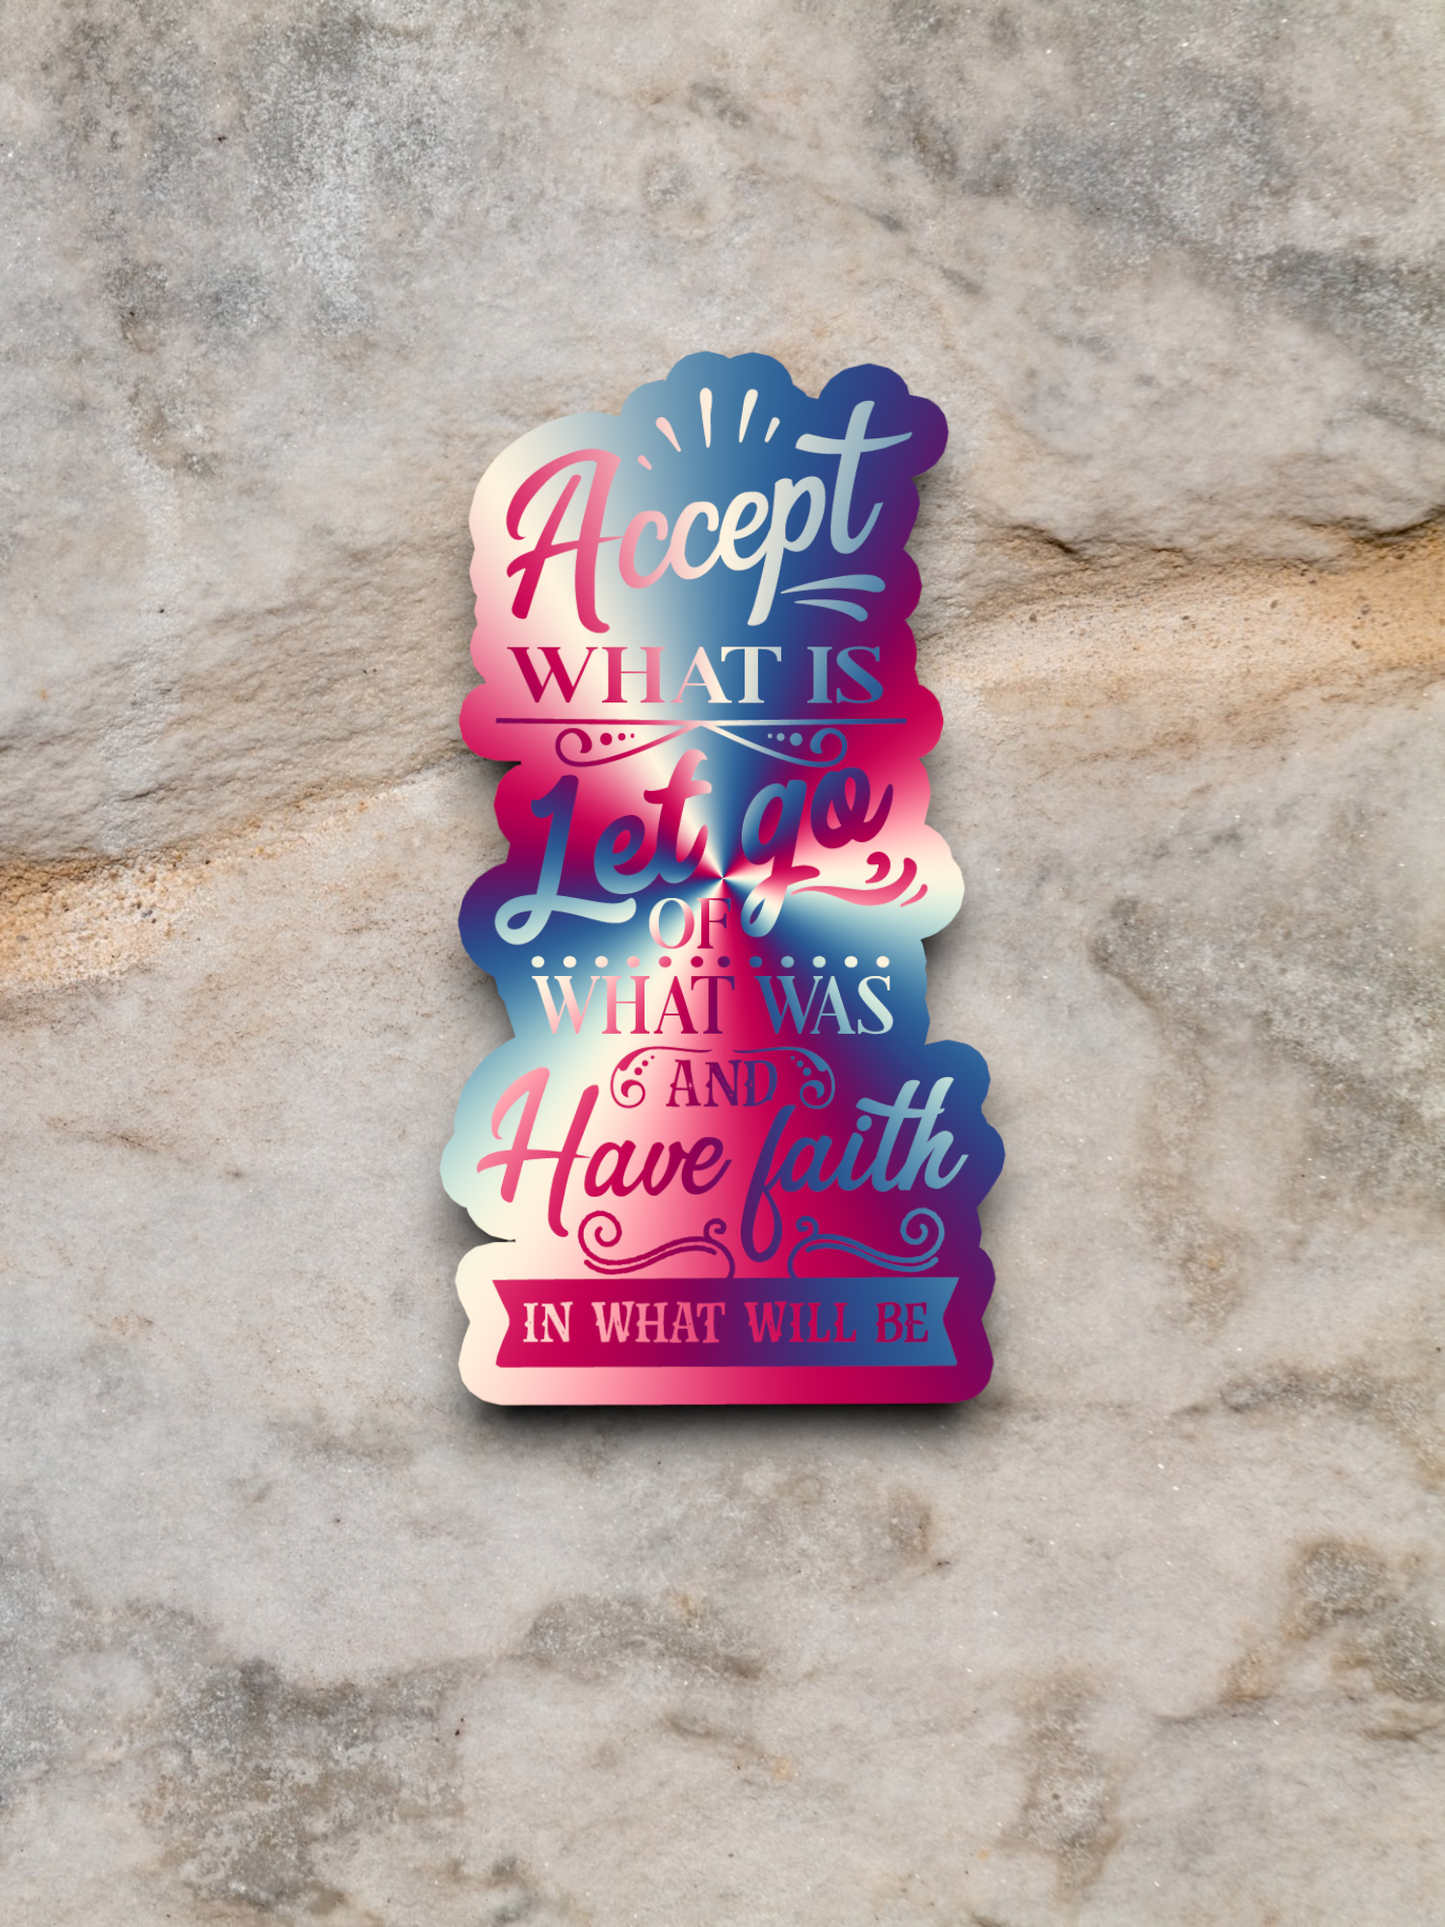 Accept What is Let Go of What Was and Have Faith - Faith Sticker